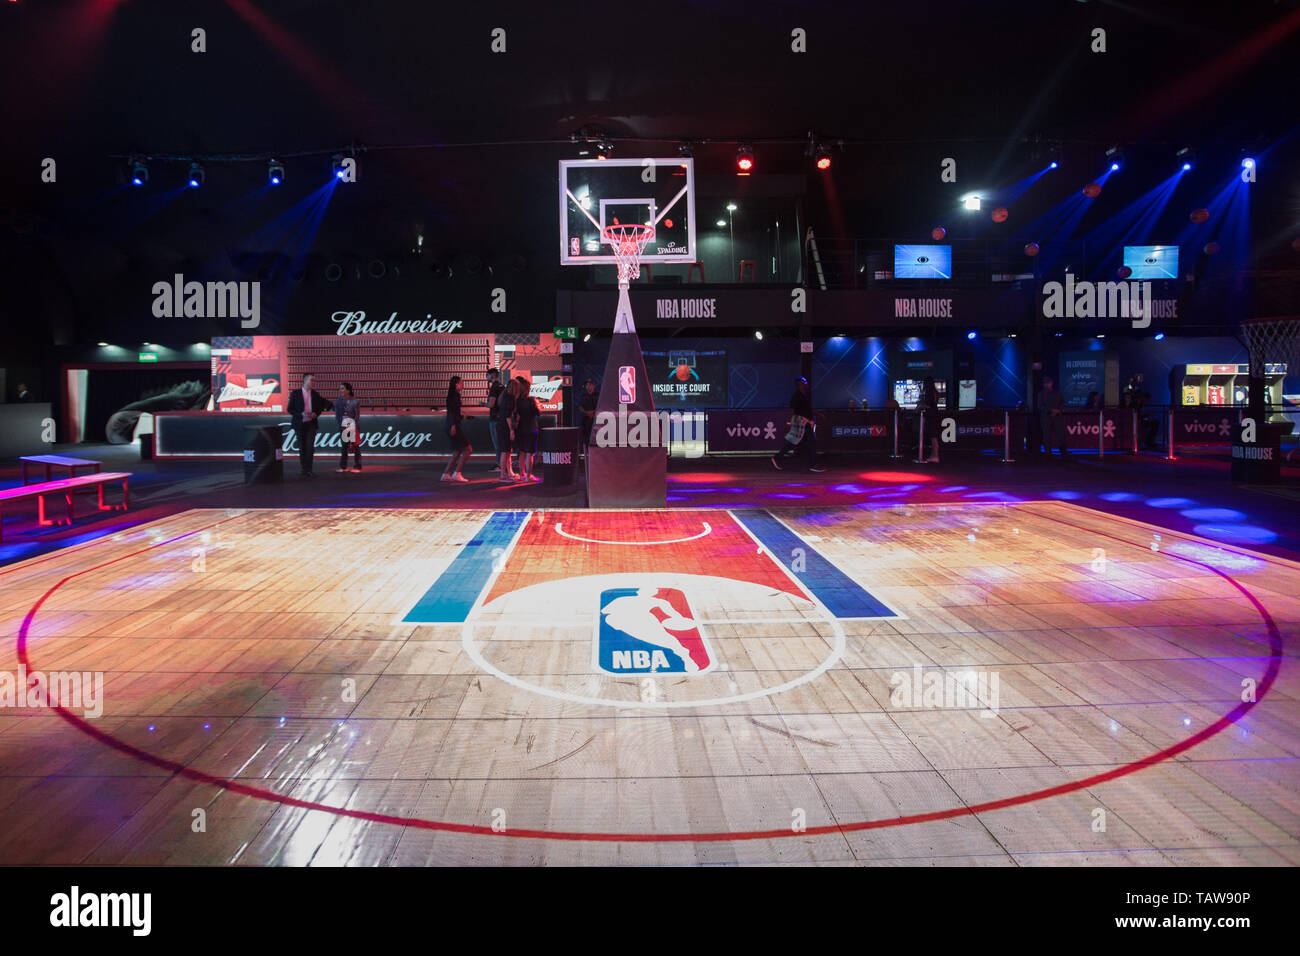 SÃO PAULO, SP - 28.05.2019: NBA HOUSE 2019 - The NBA brings the NBA House  2019 to São Paulo. The event spans 3000 m² in the parking lot of Eldorado  Shopping, and